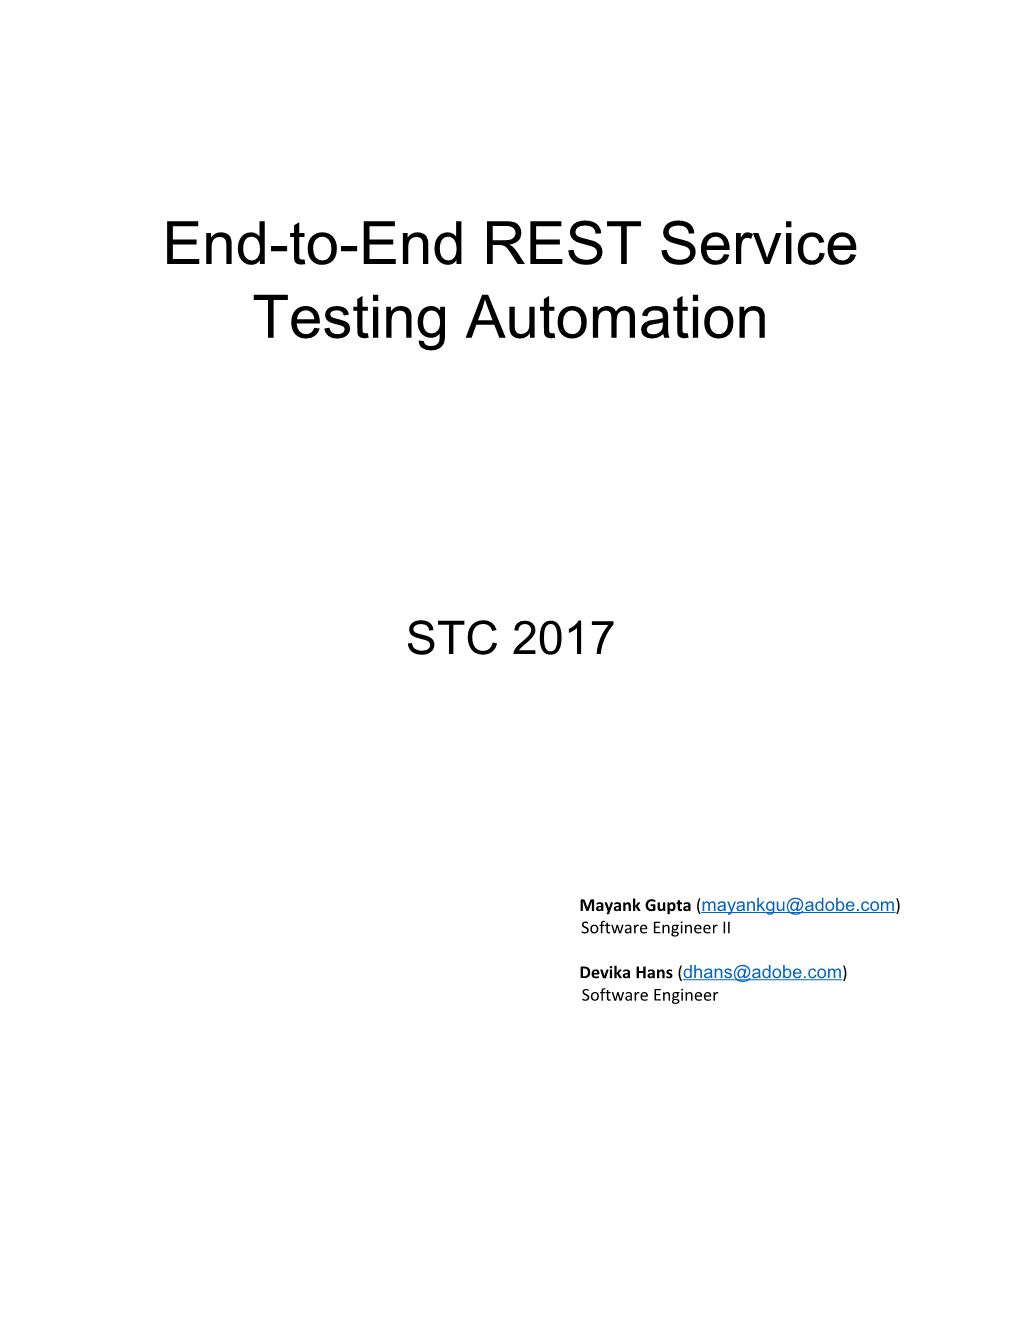 End-To-End REST Service Testing Automation